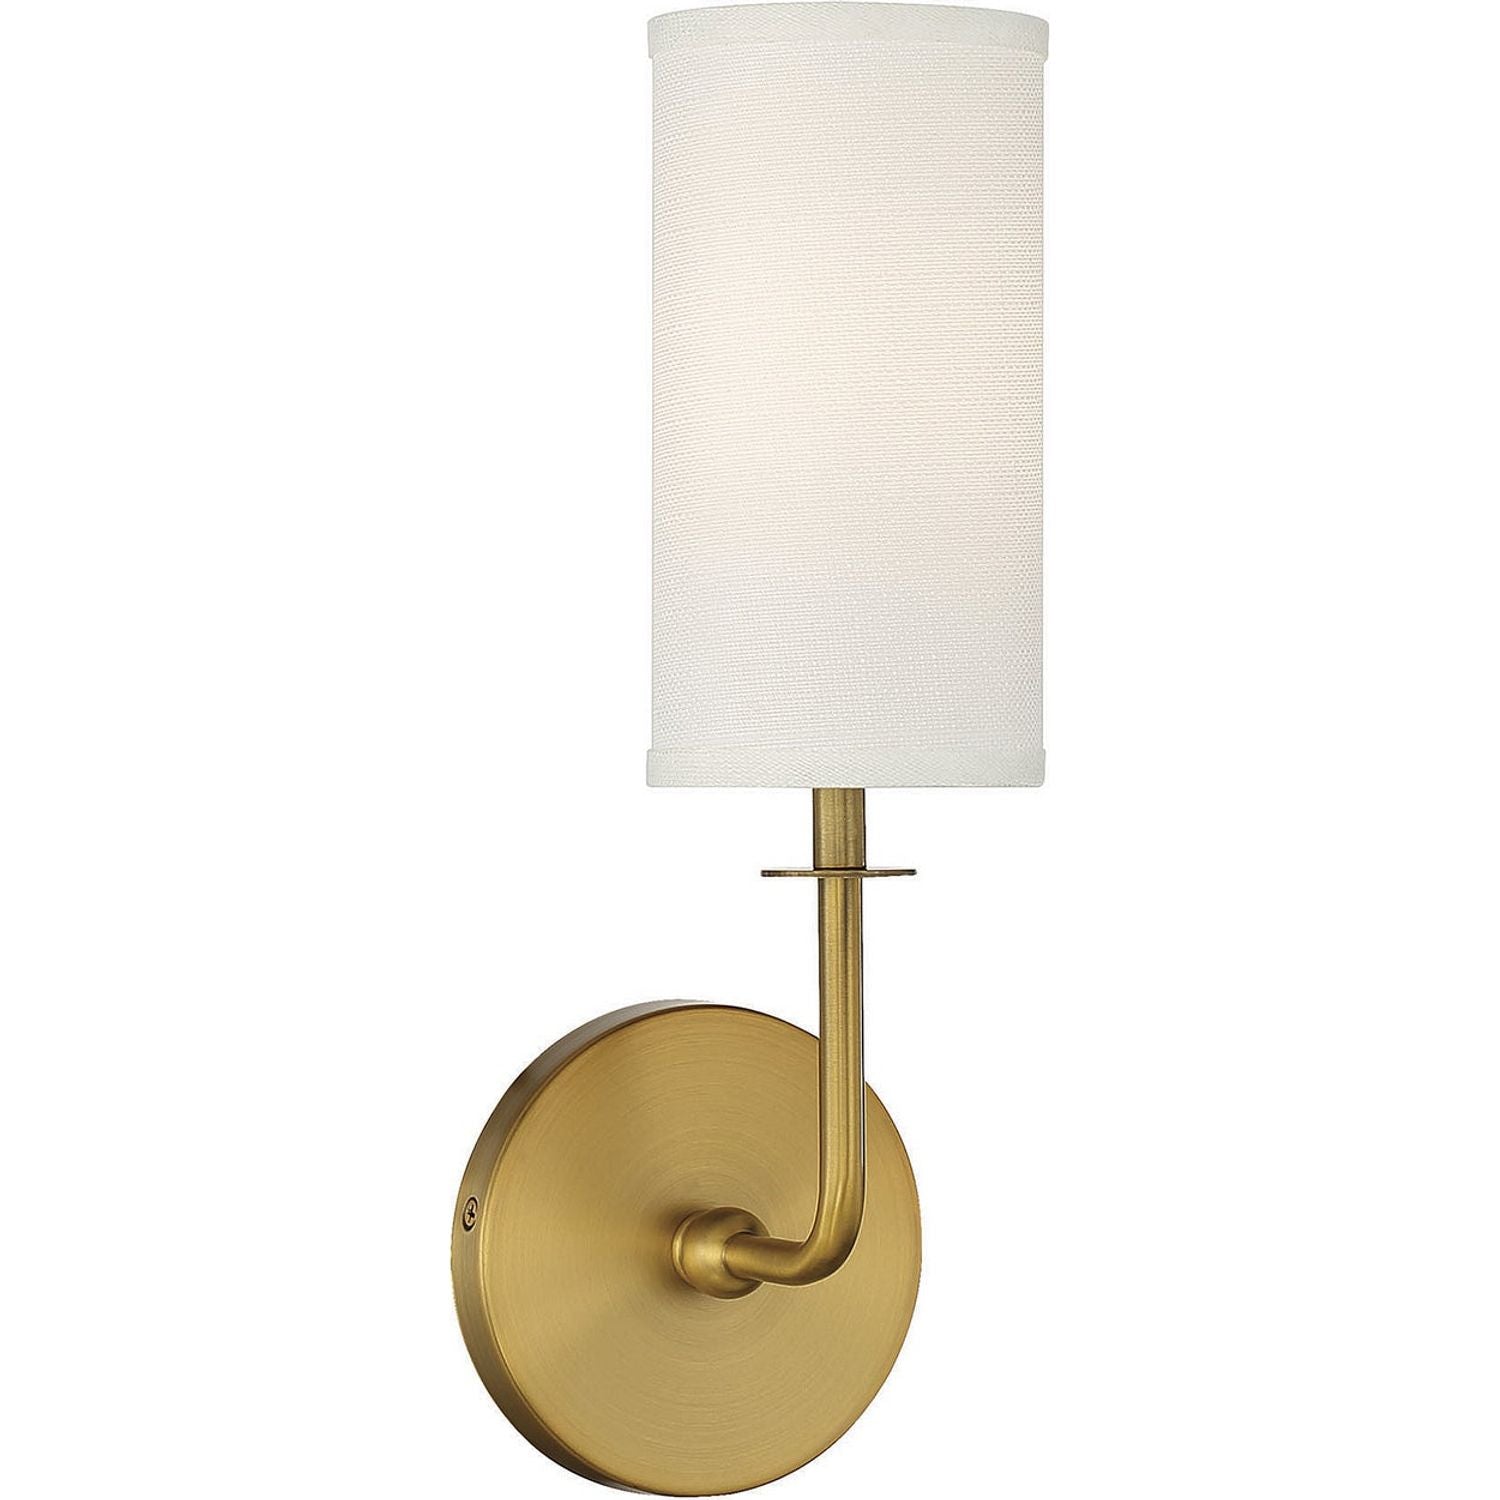 Savoy House - 9-1755-1-322 - One Light Wall Sconce - Powell - Warm Brass